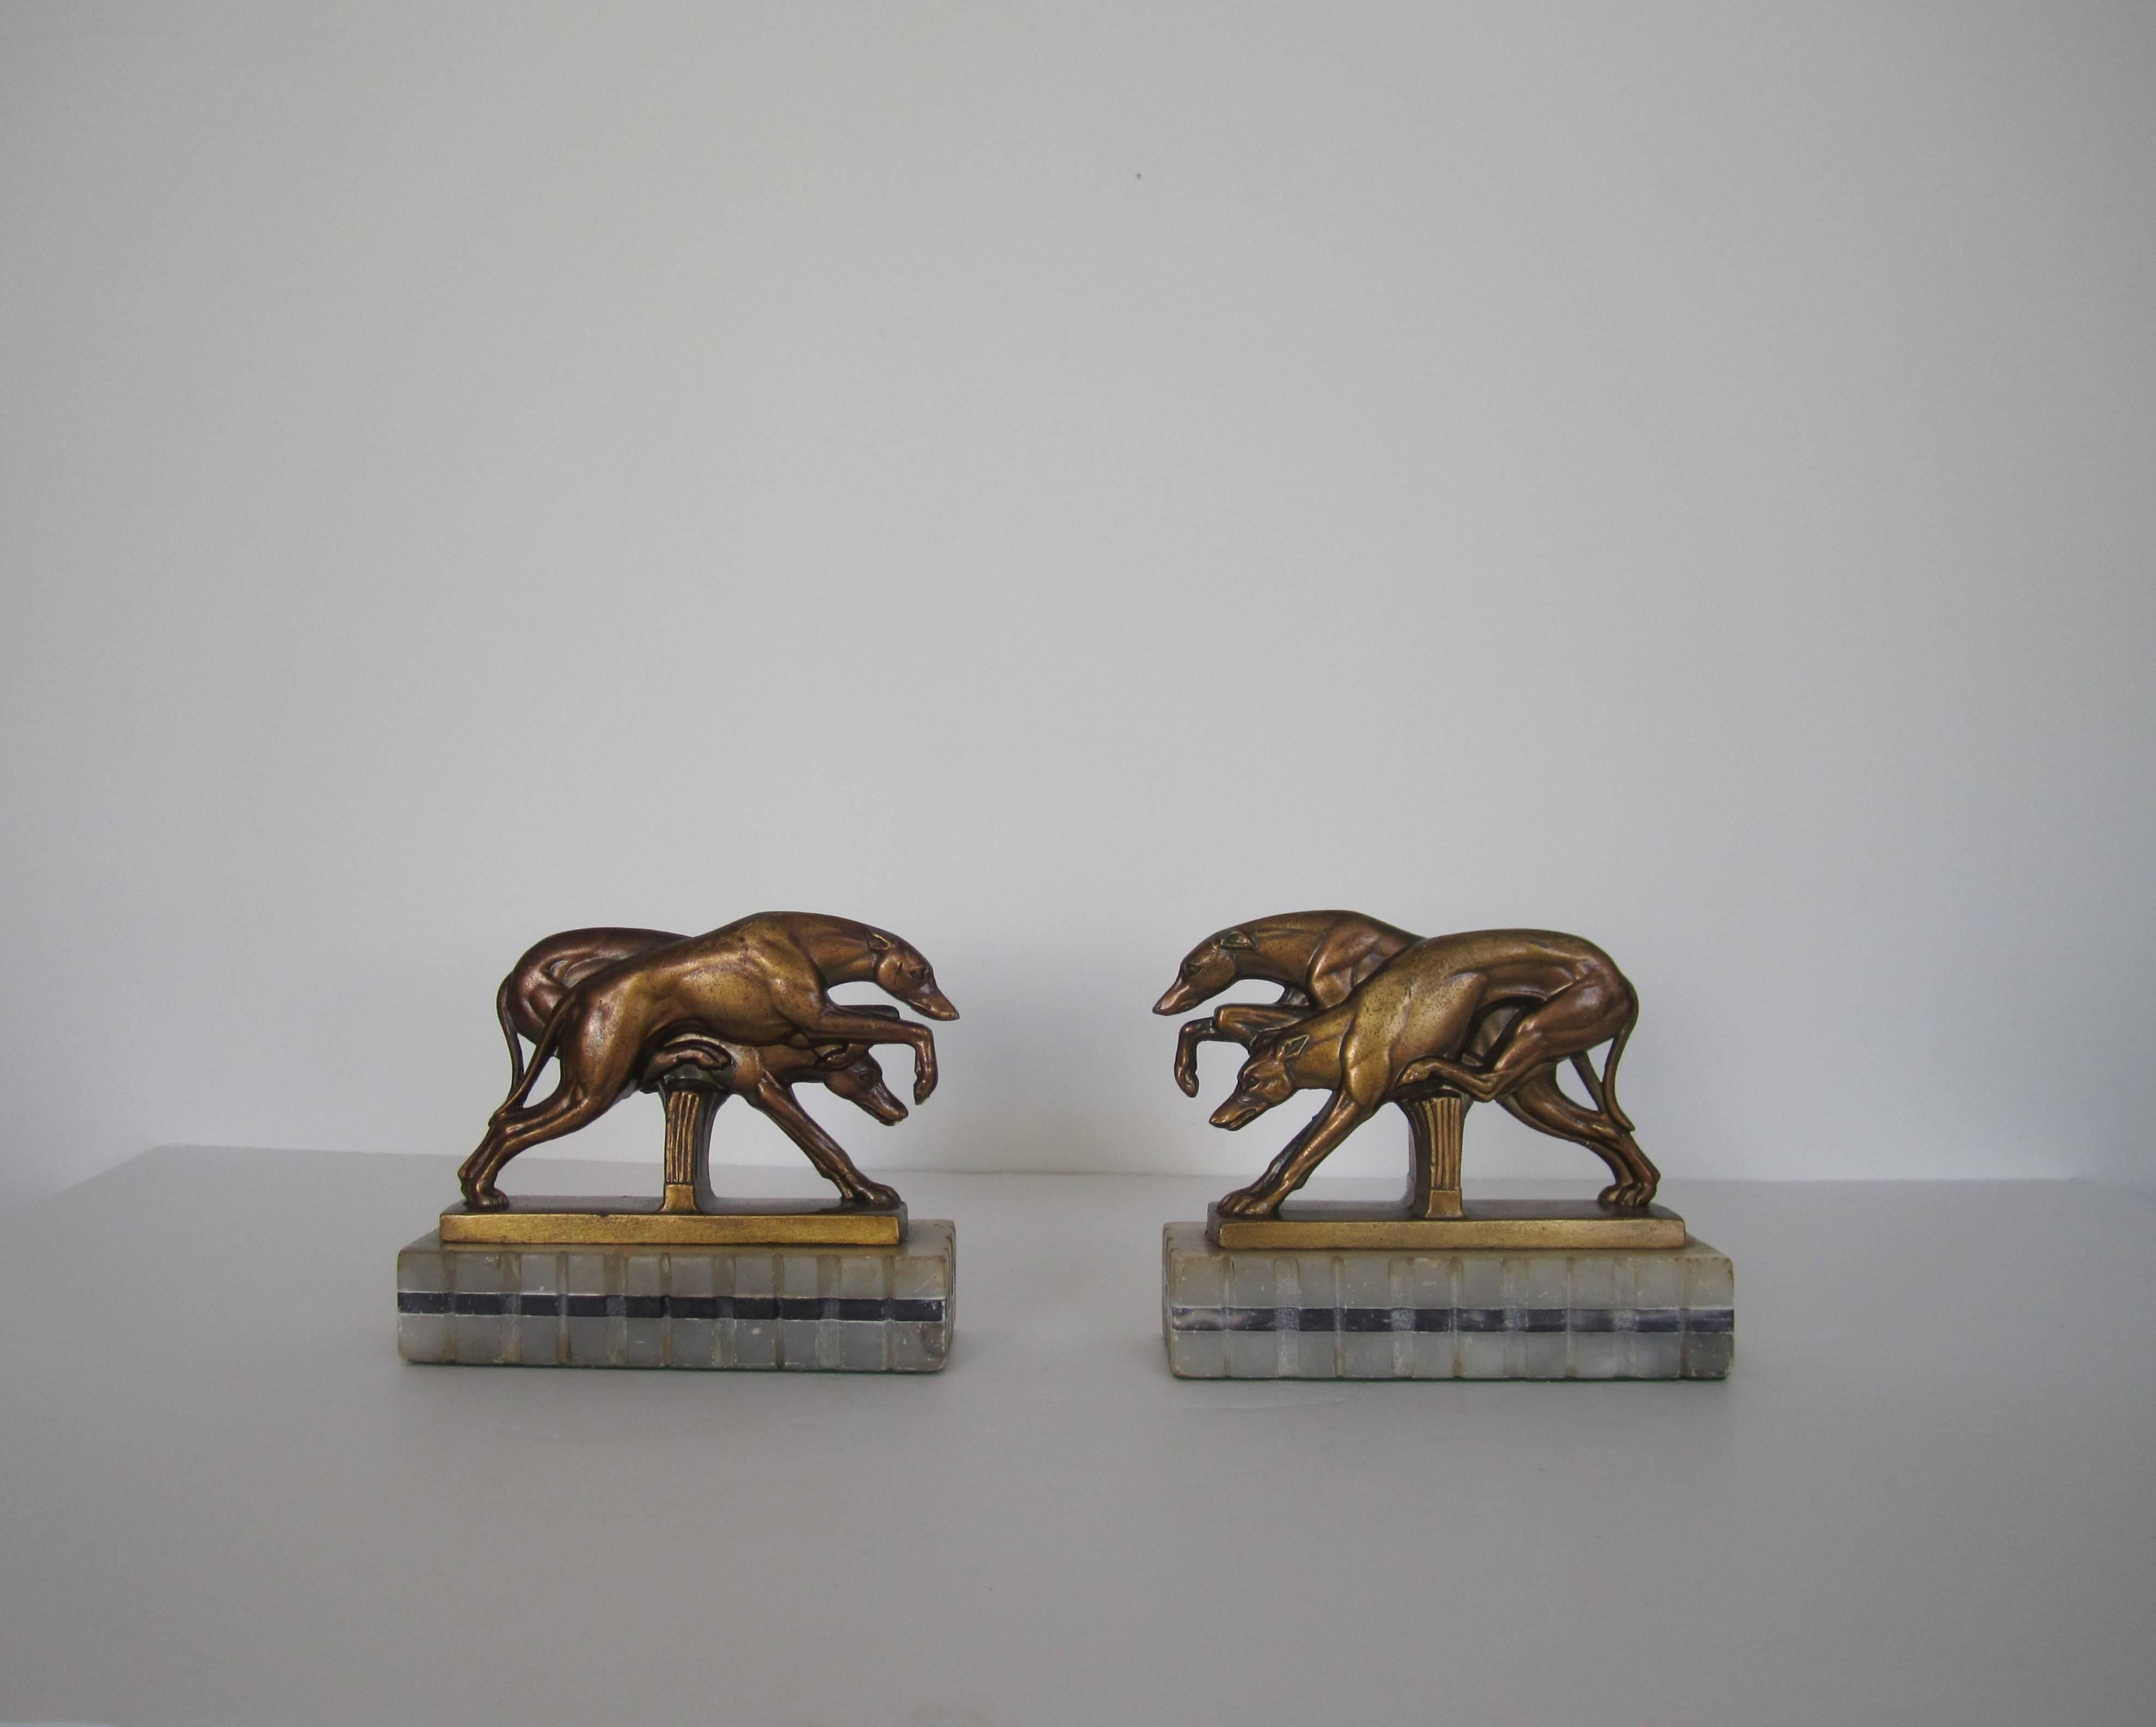 Plated Vintage Art Deco Greyhound Dog Bookends on Black and White Marble Bases, 1920s